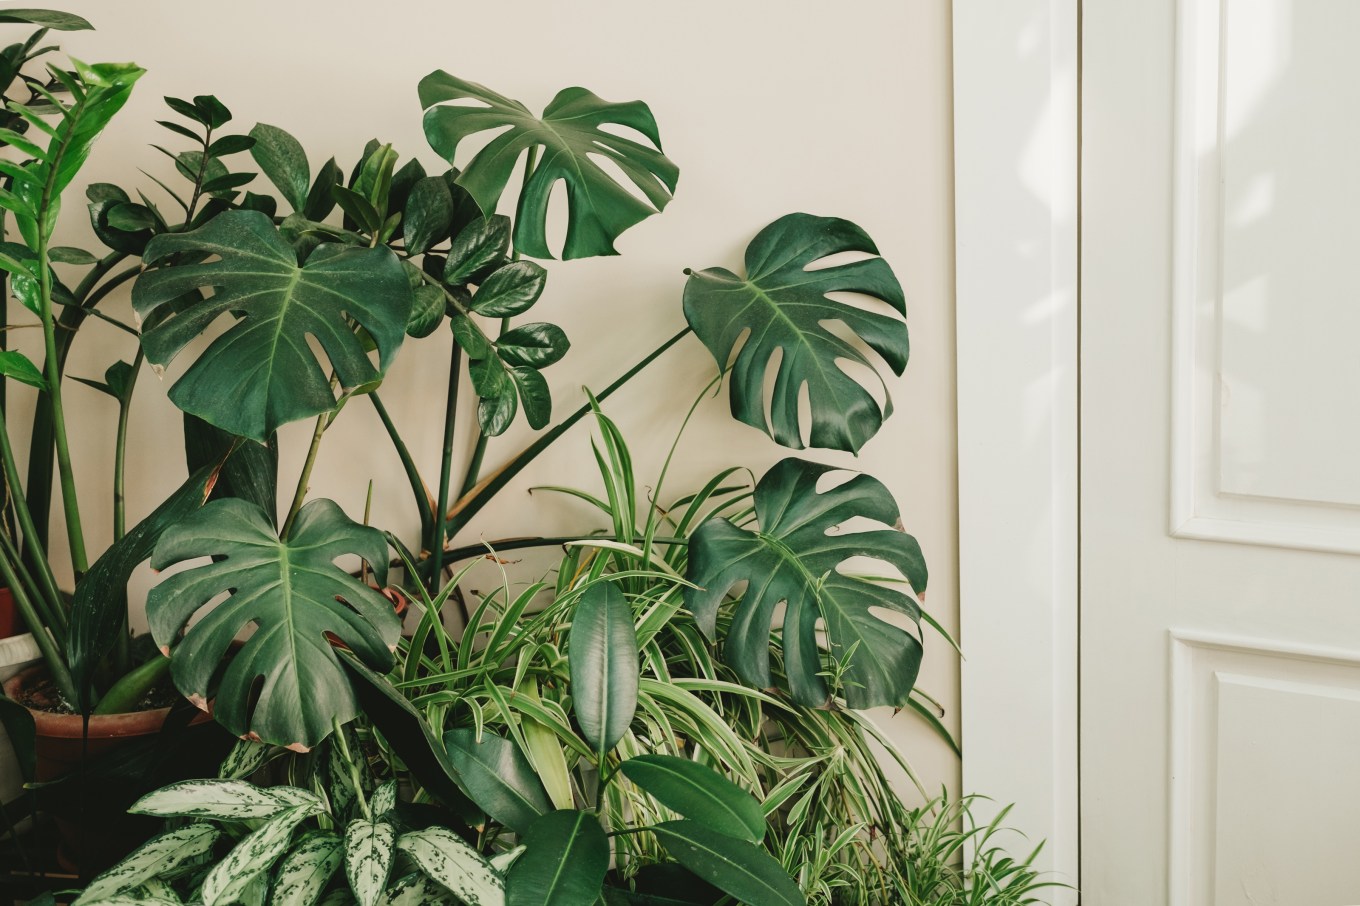 A monstera plant with large leaves against an off-white wall.